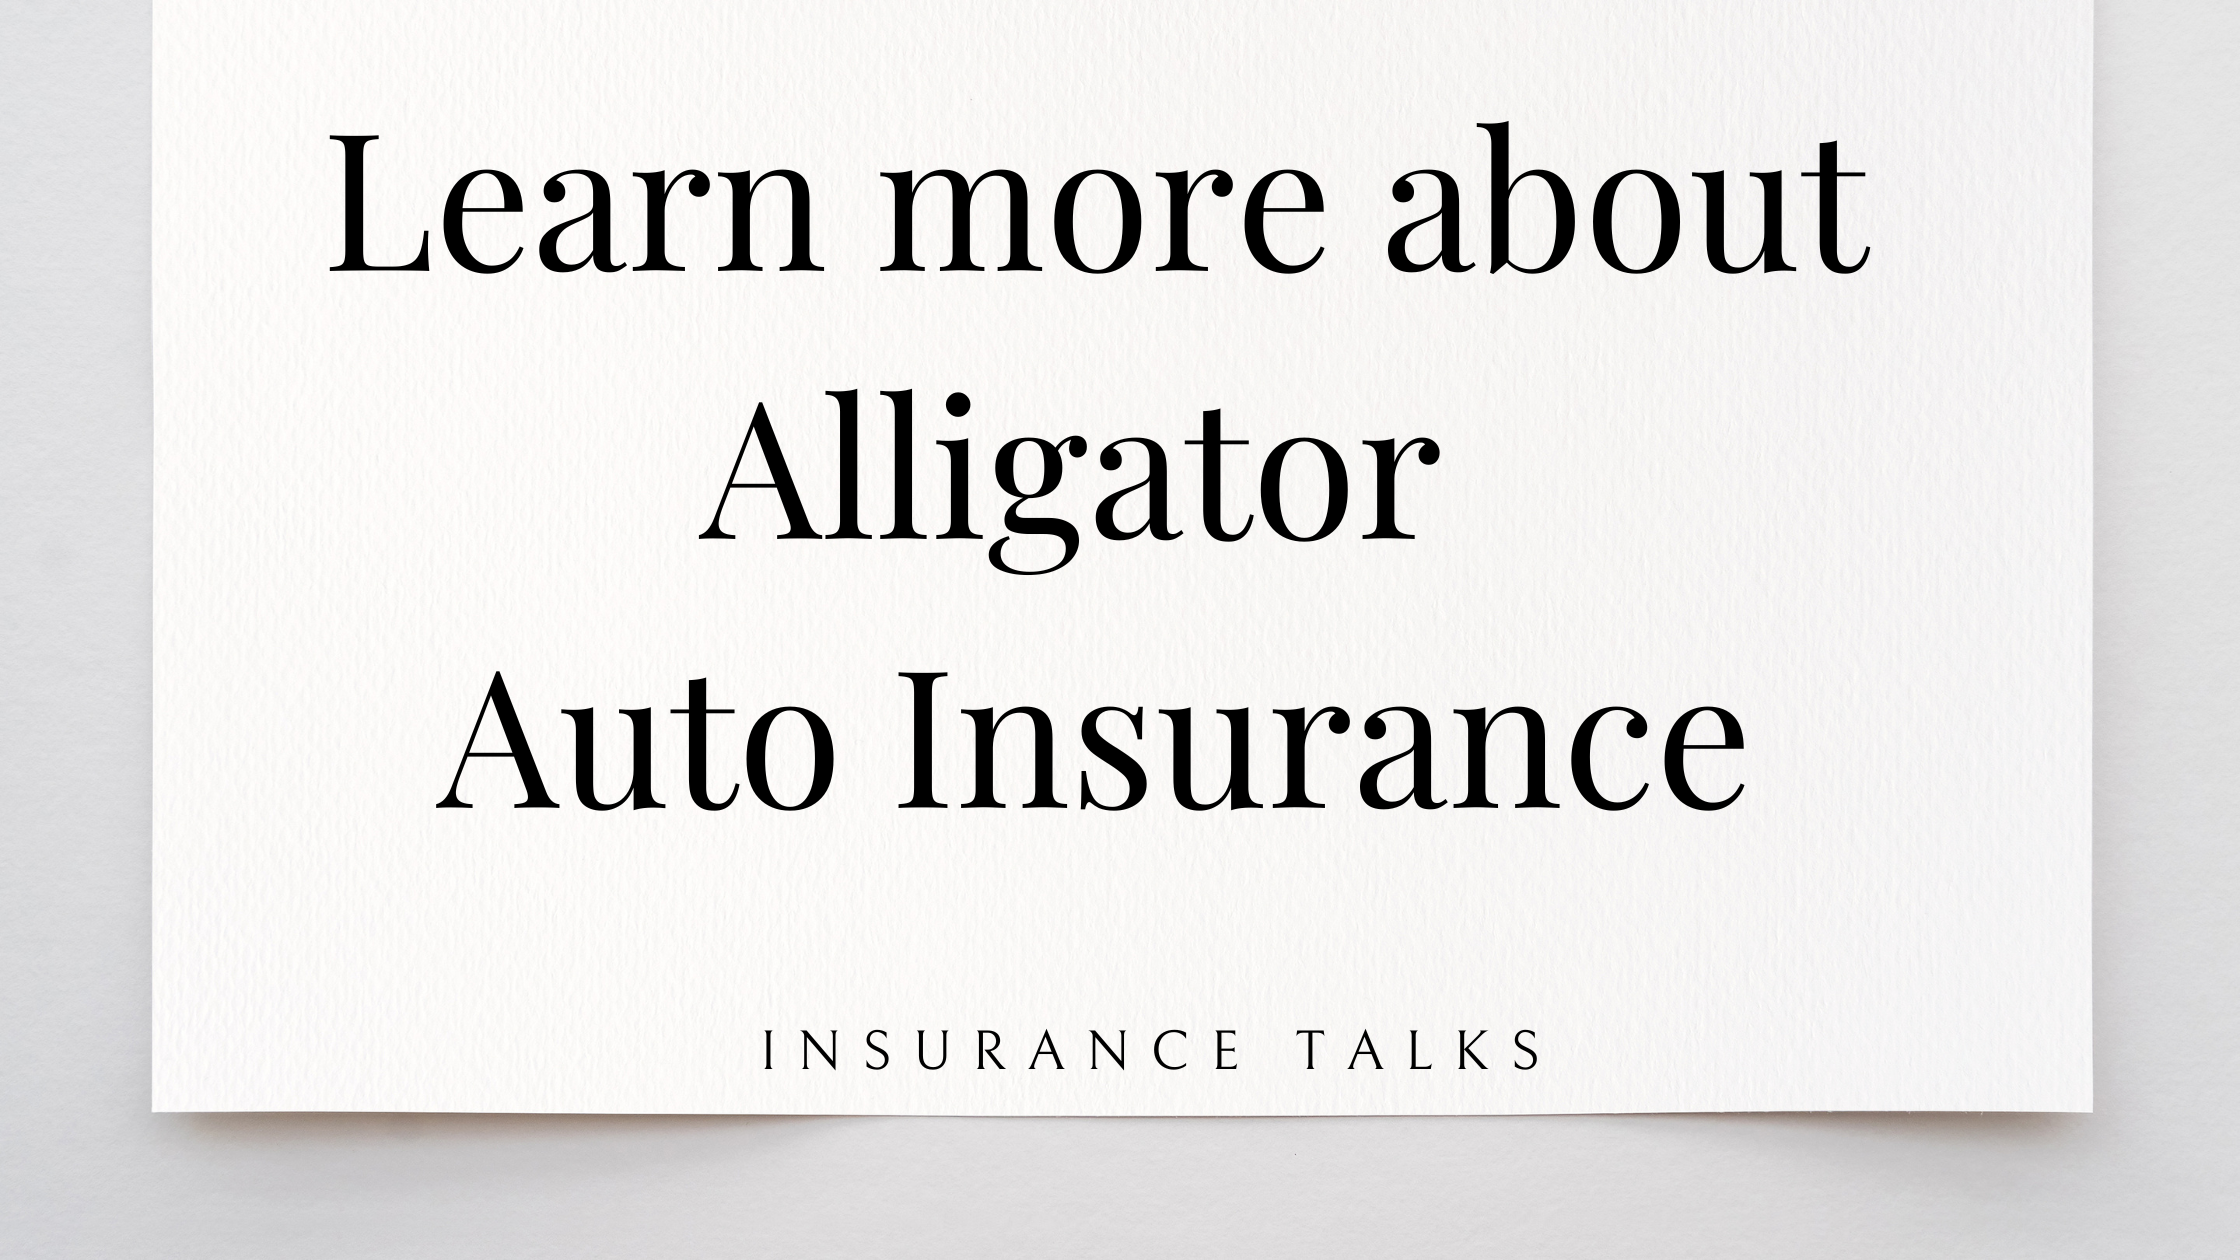 Learn more about Alligator Auto Insurance